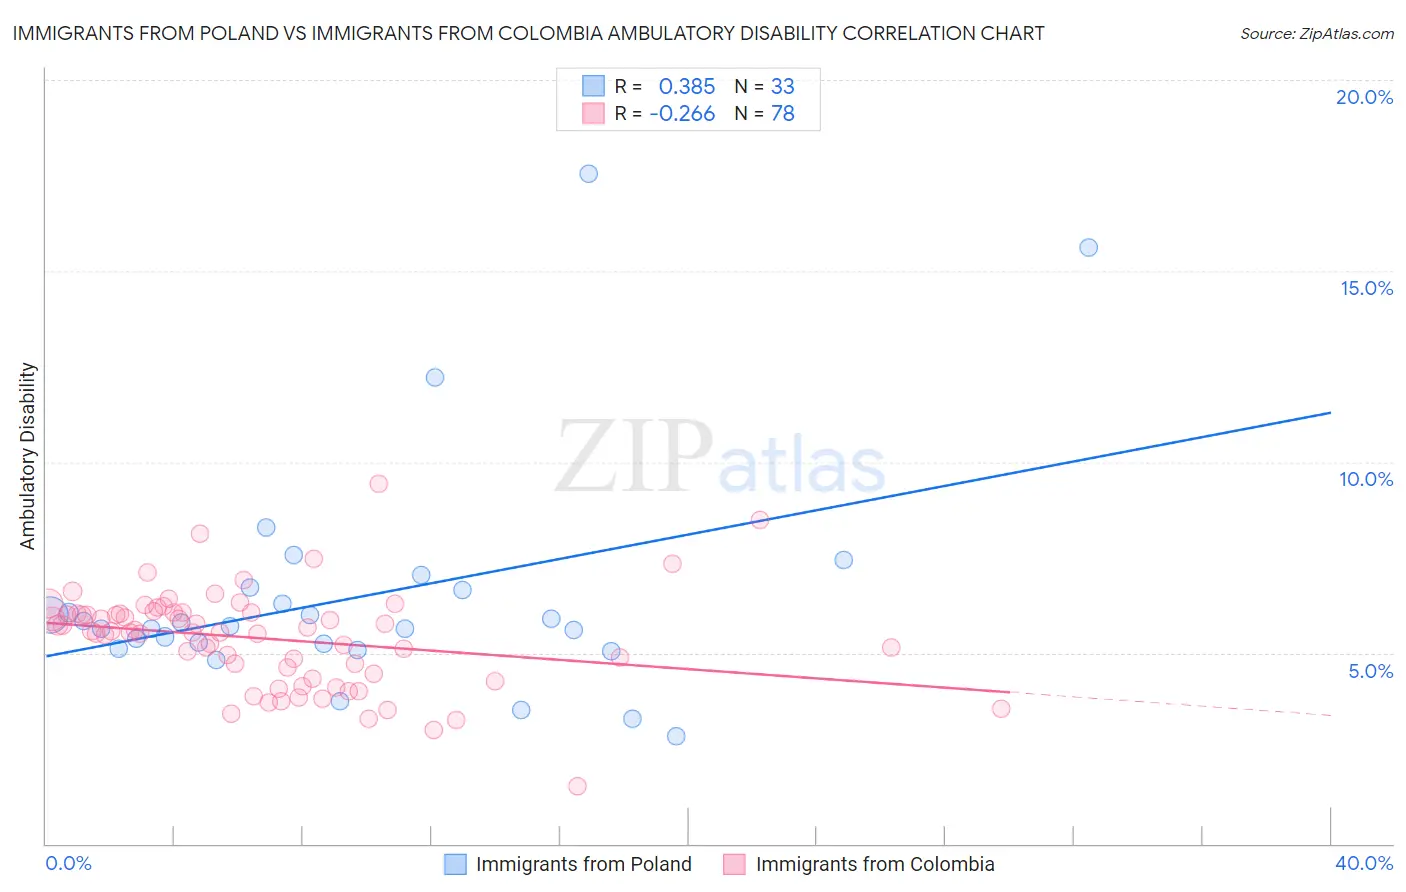 Immigrants from Poland vs Immigrants from Colombia Ambulatory Disability